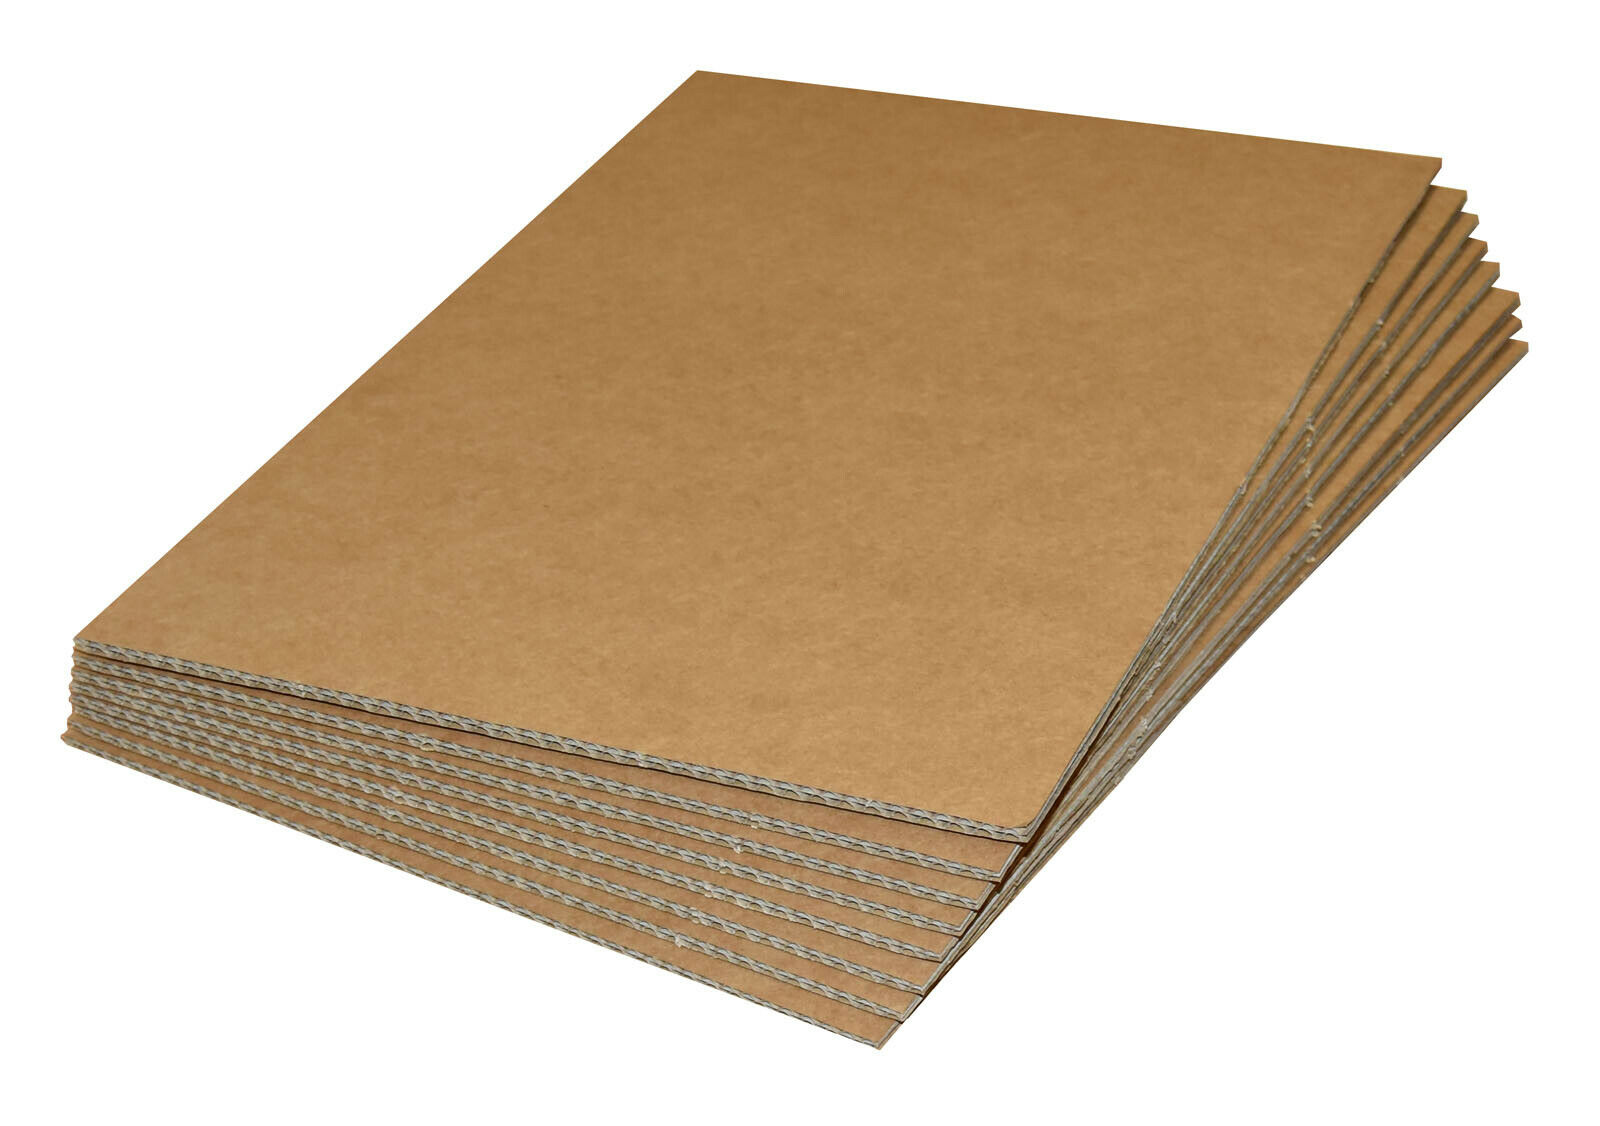 Double Face Corrugated Cardboard 9 X 6 Sheets and Pads by Paper Mart Quantity 50 Sheets